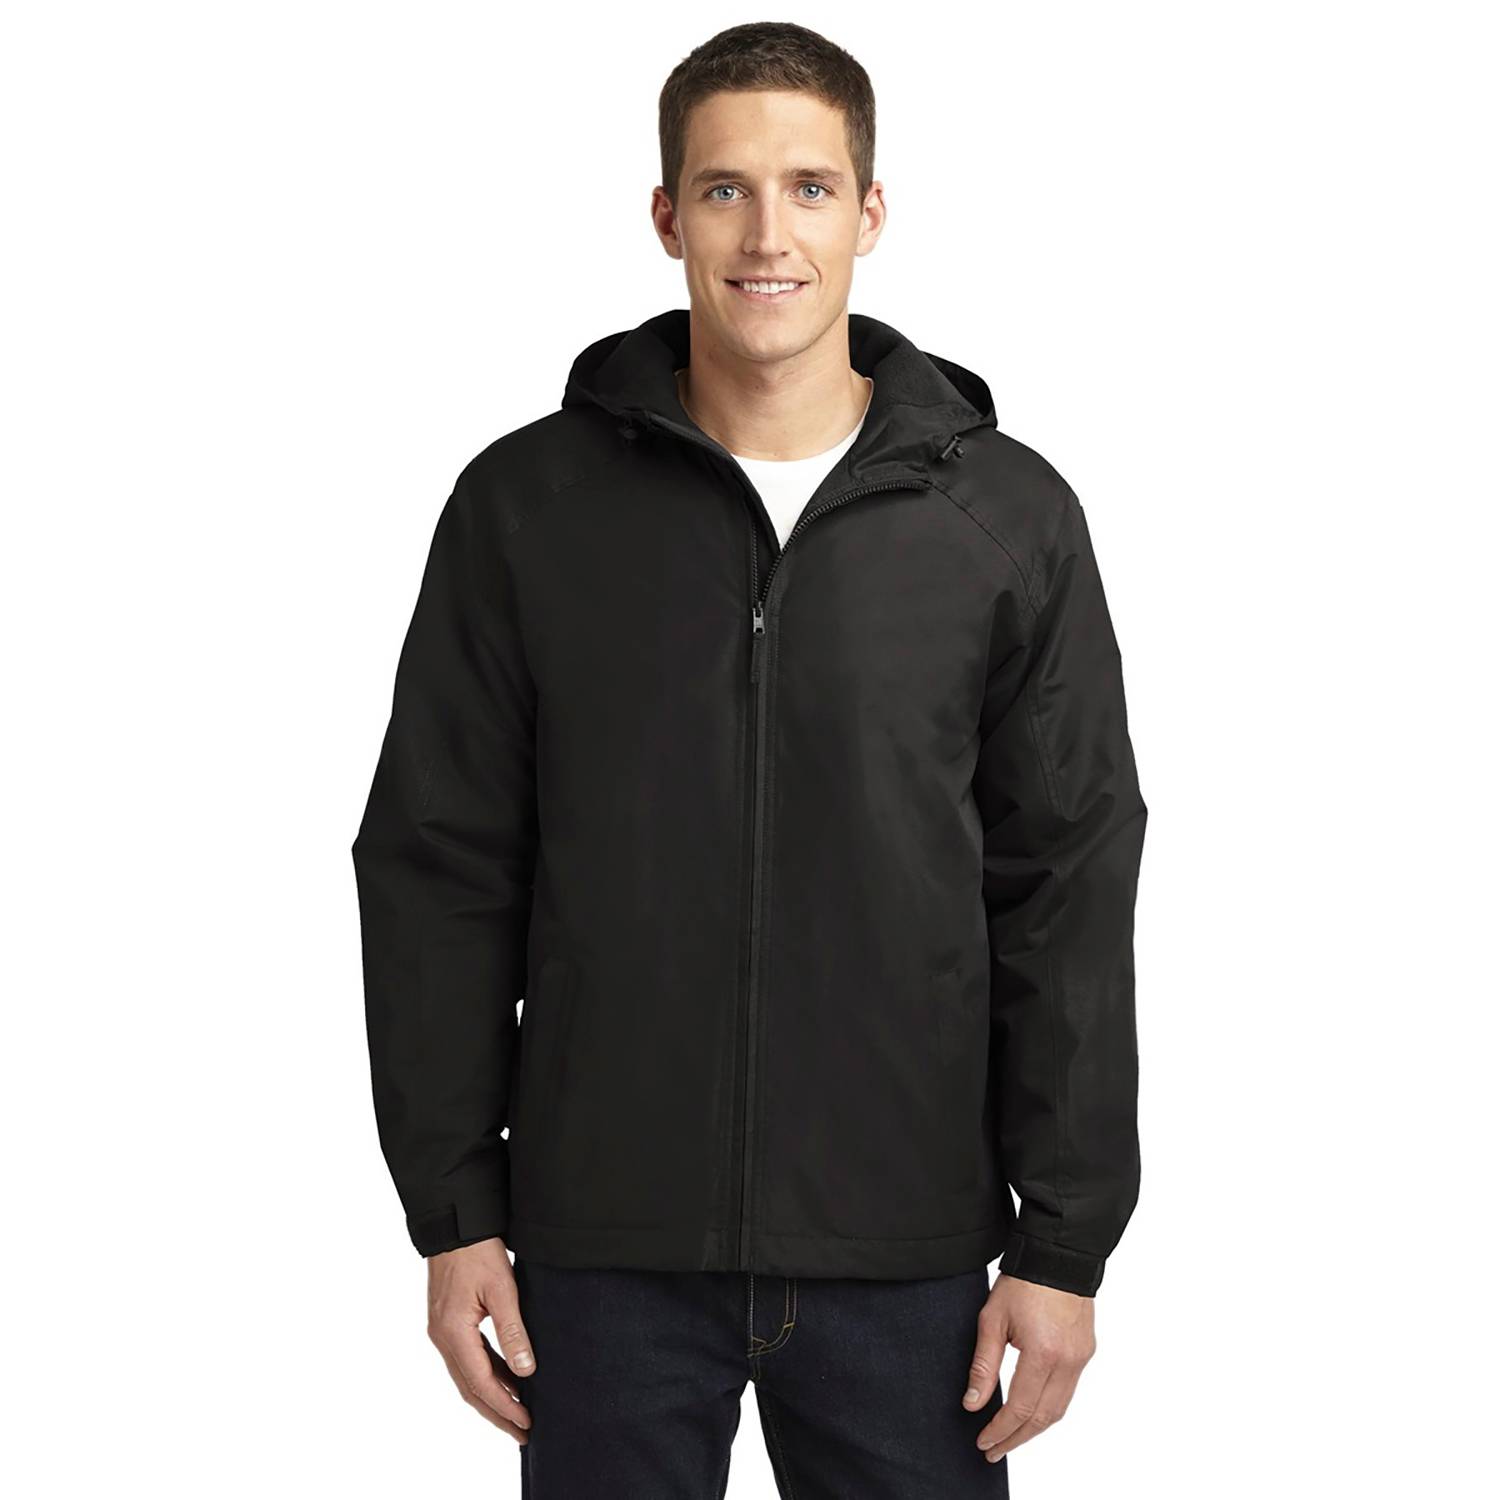 Port Authority Hooded Charger Jacket